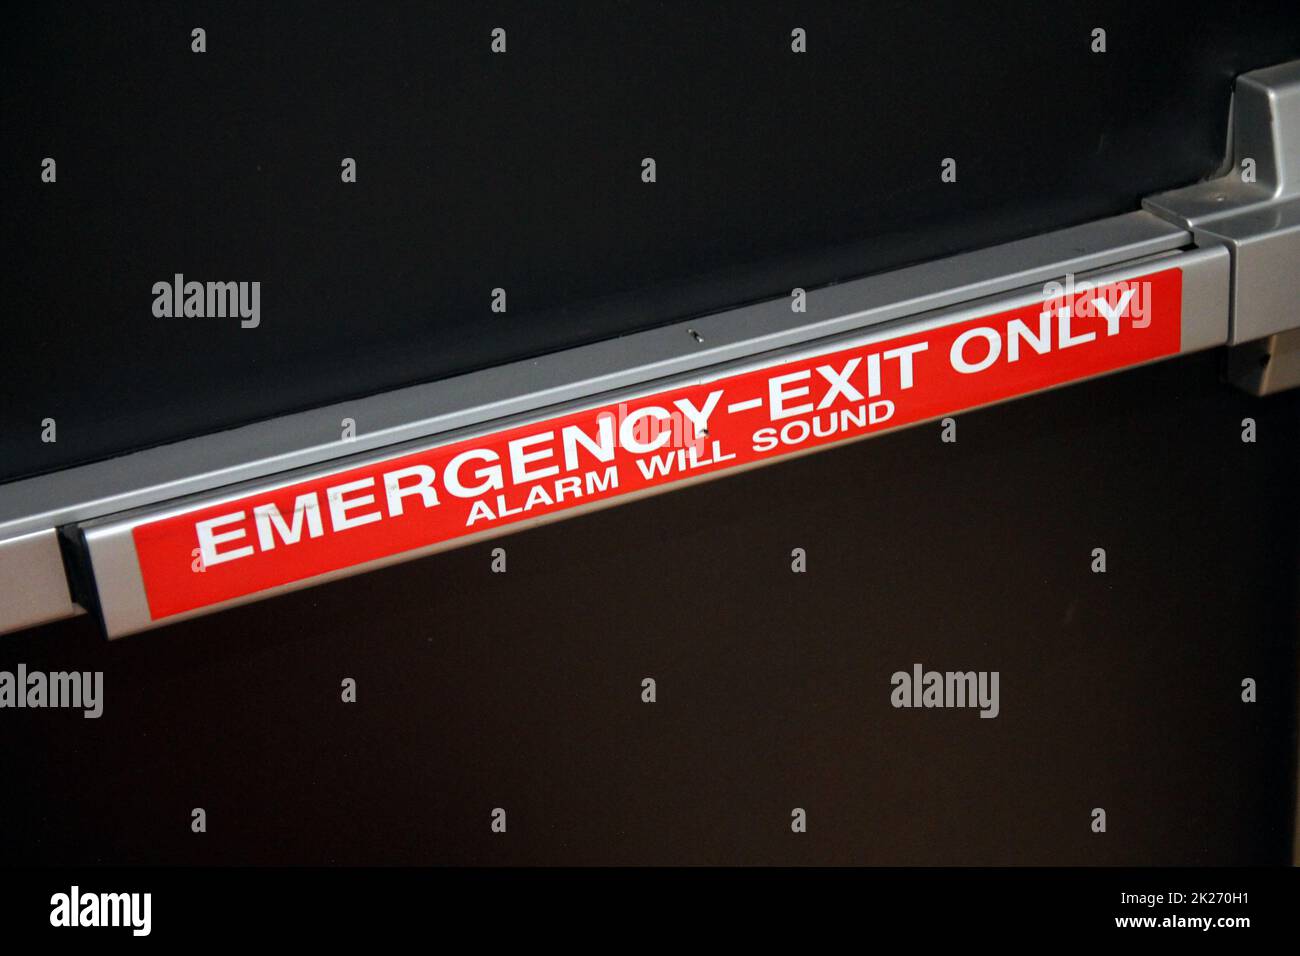 Emergency exit only alarm wall push handle on a black security door Stock Photo